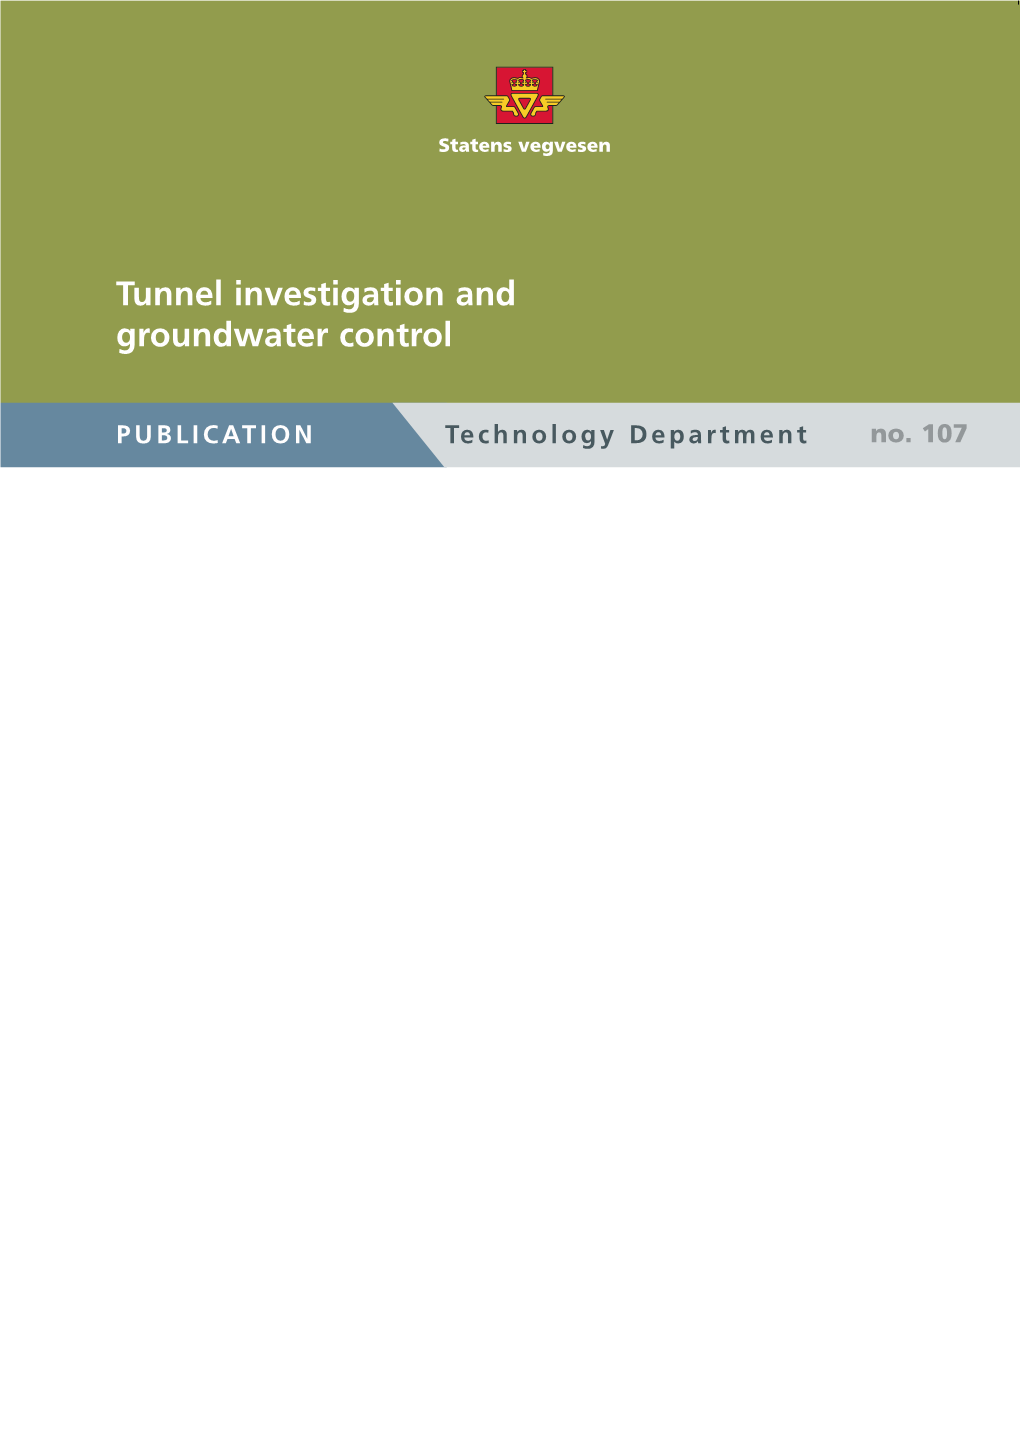 Tunnel Investigation and Groundwater Control